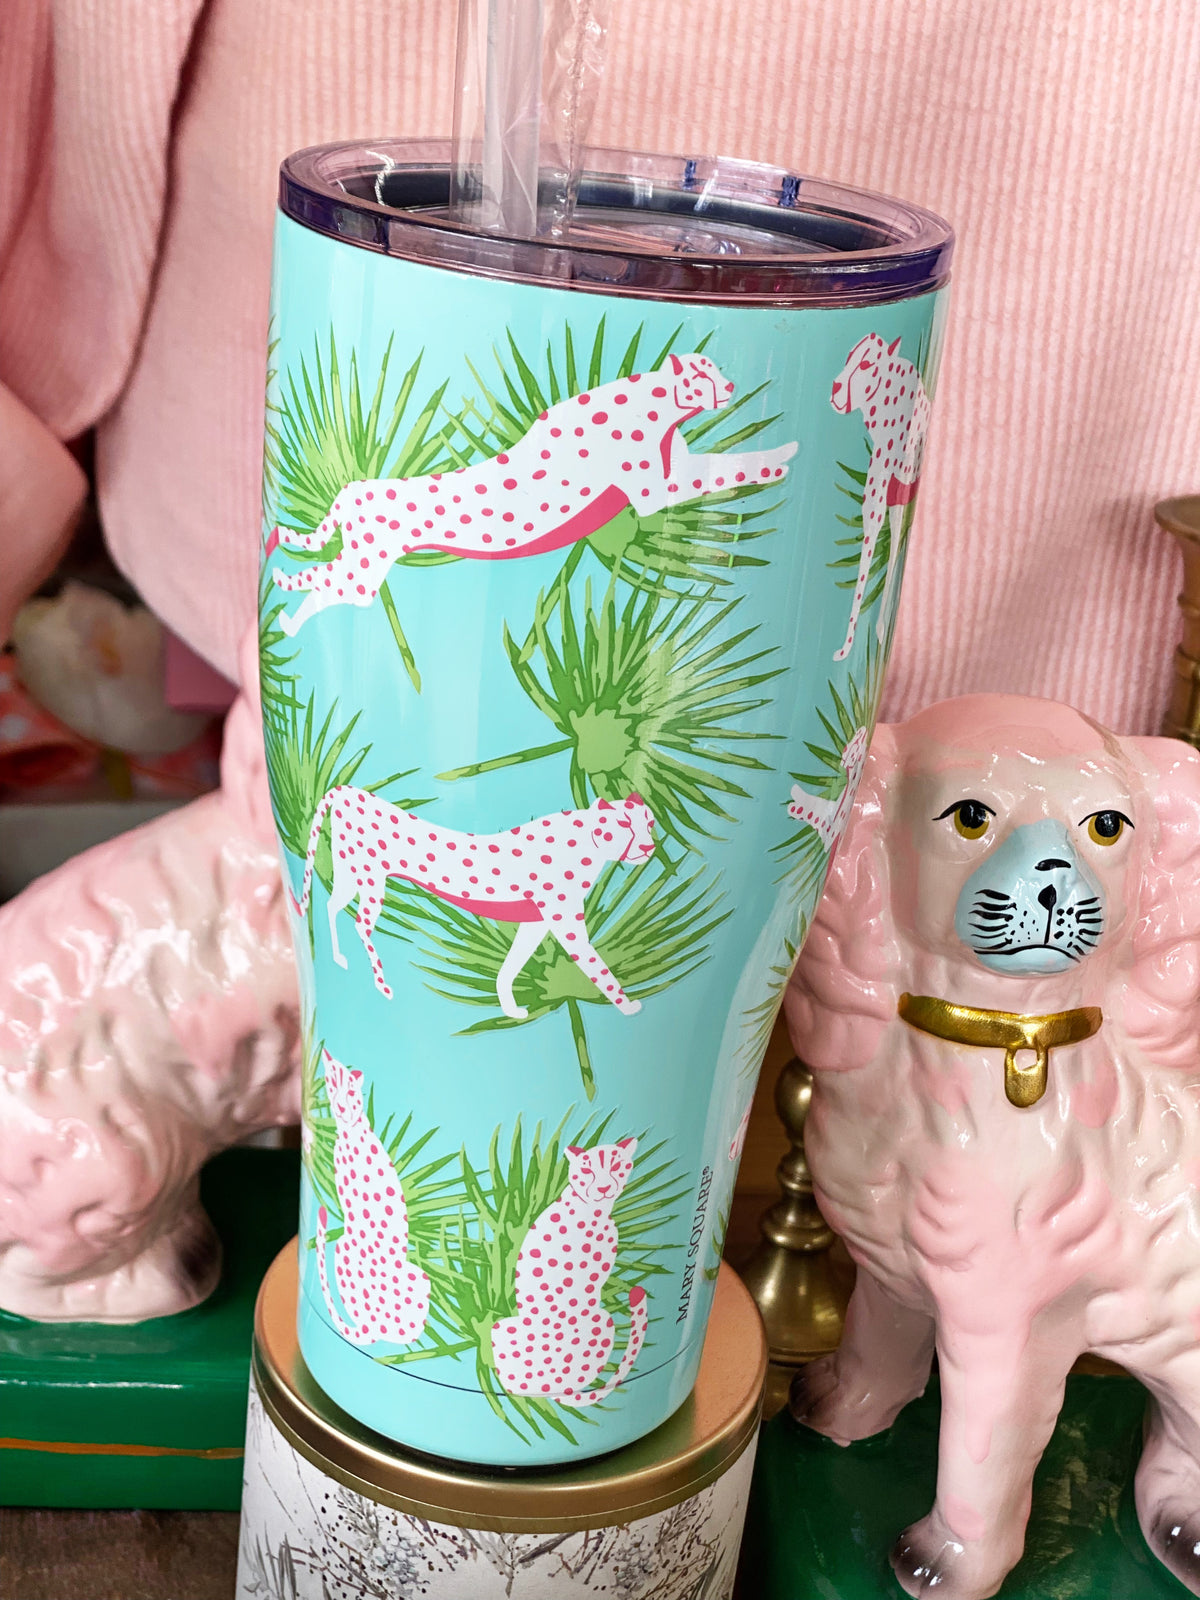 https://www.bungalow123.shop/wp-content/uploads/1691/42/theres-a-wide-selection-of-30-oz-stainless-steel-tumbler-party-animal-bungalow-123-for-you-to-pick-from_0.jpg